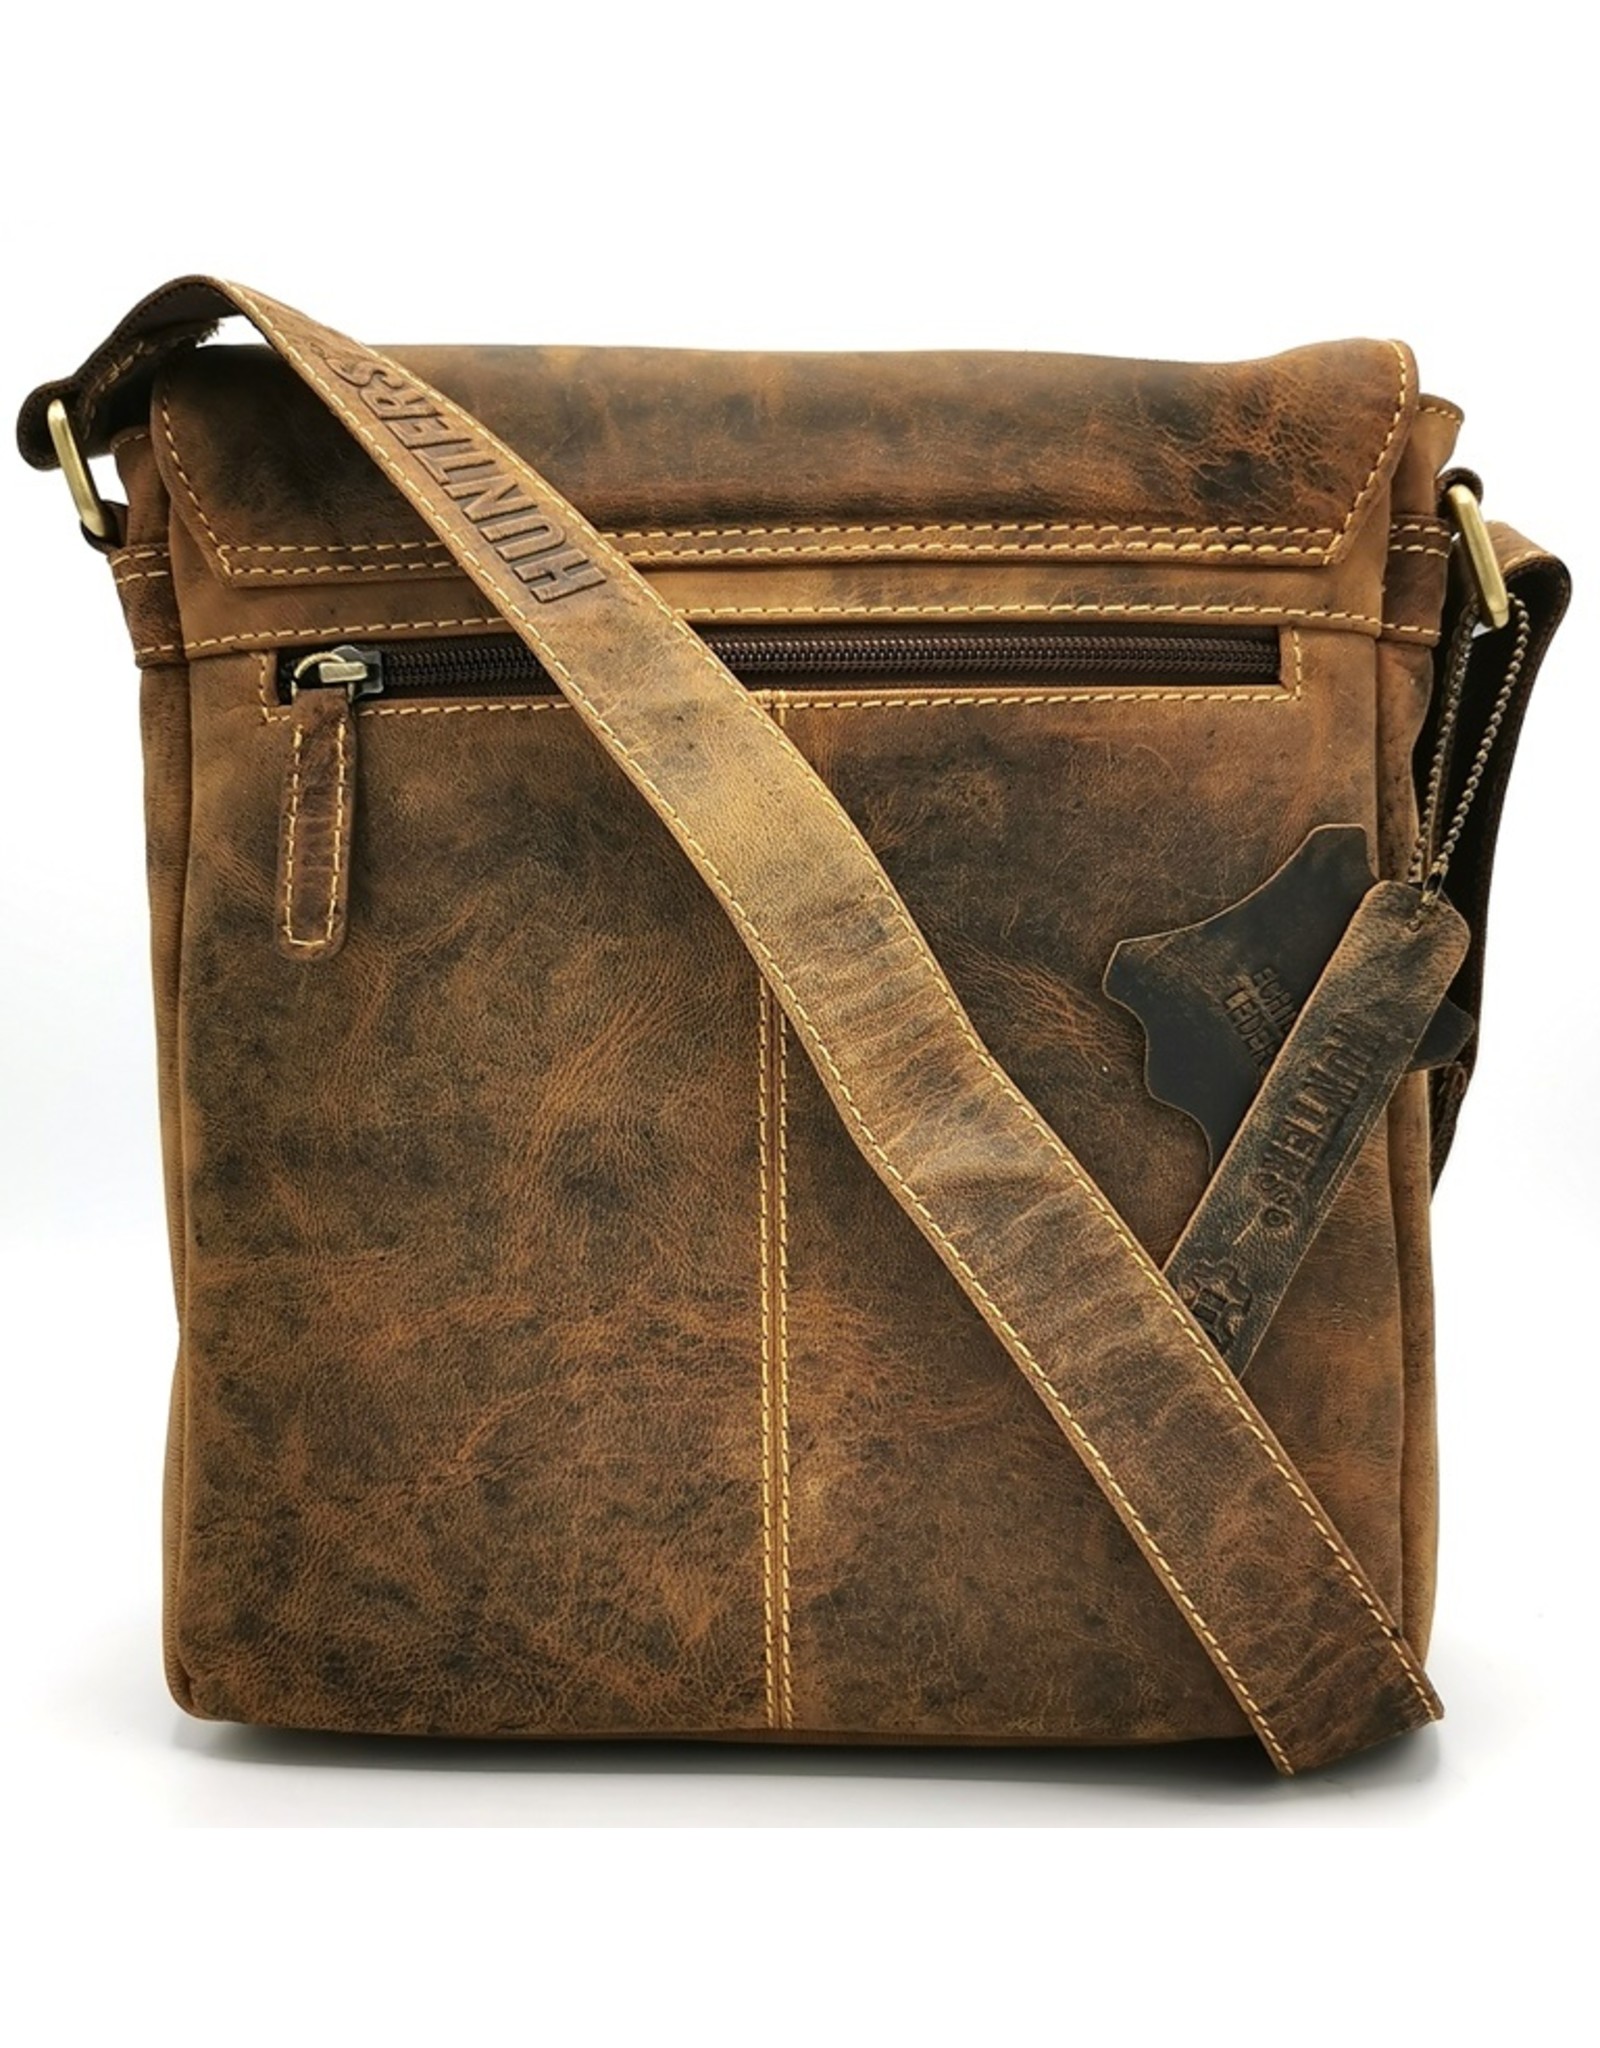 Hunters Leather Shoulder bags  Leather crossbody bags - Hunters Leather Crossbody Bag Buffalo Leather (dark tan)